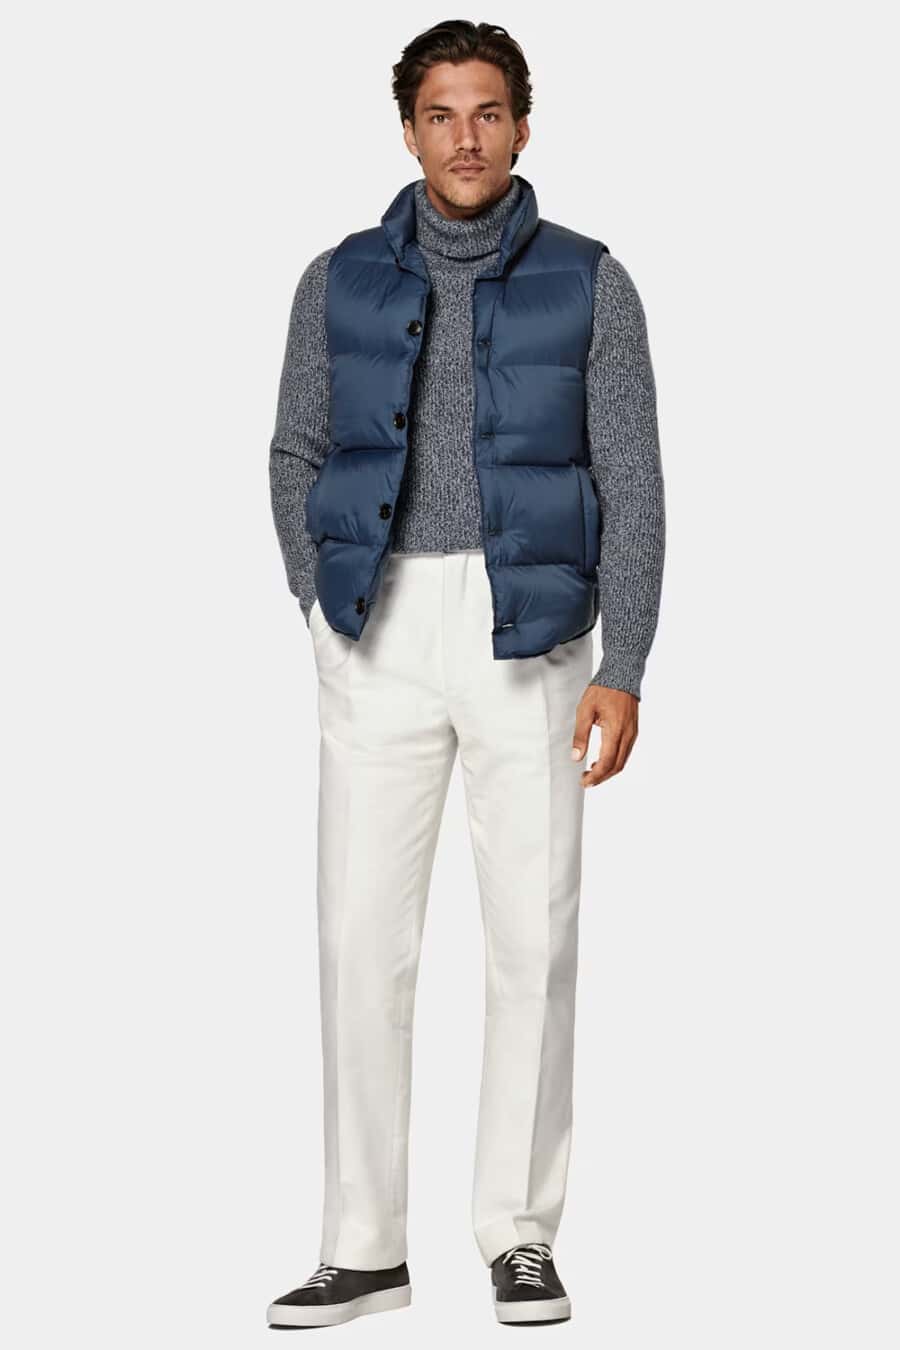 Men's white pants, grey turtleneck, blue puffer vest and brown suede sneakers outfit